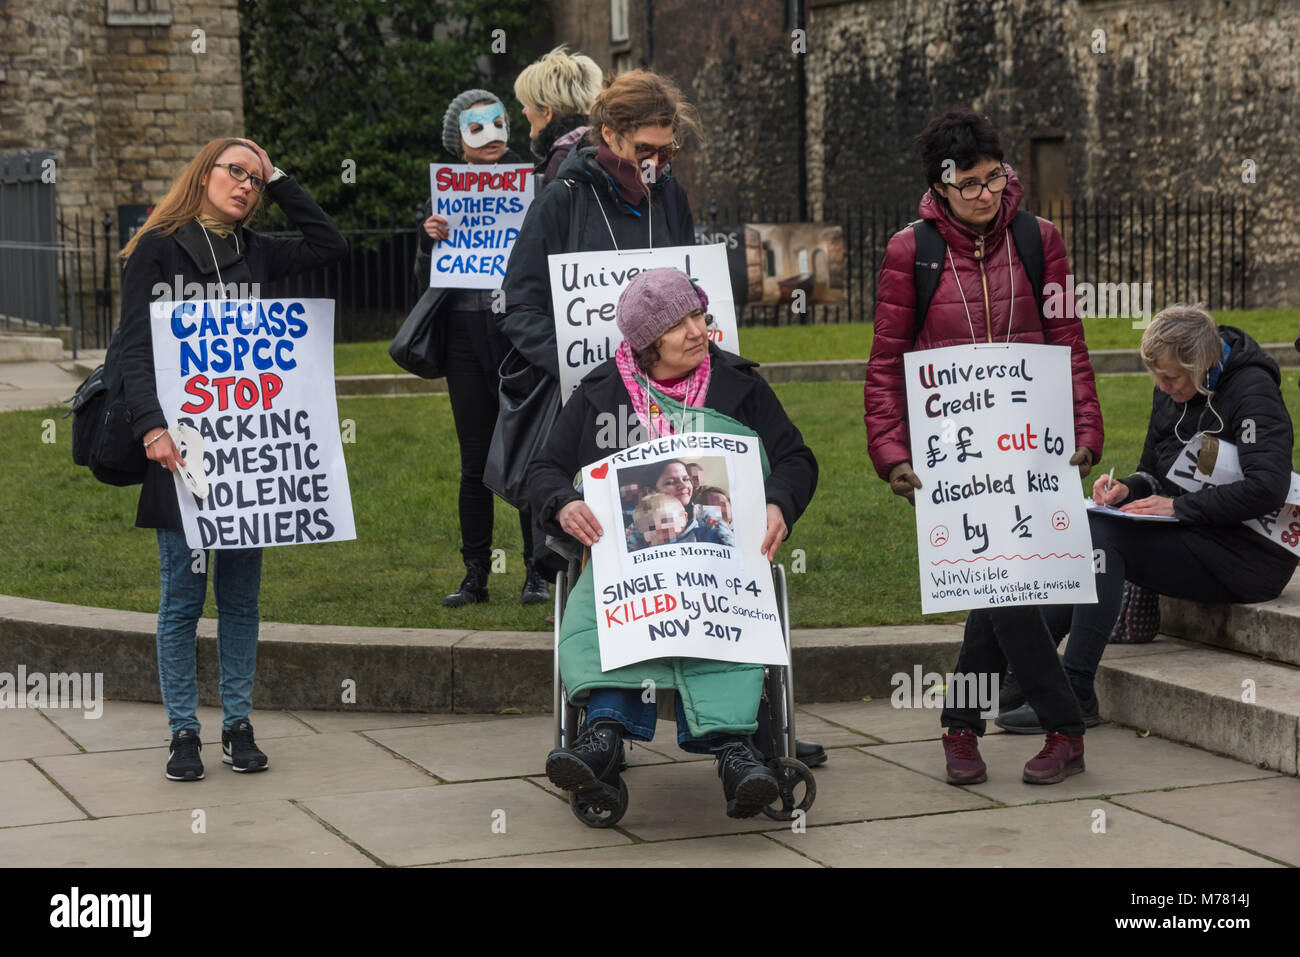 London, UK. 8th March 2018. People with posters at the Global Women's Strike mock trial of the Family Courts in an International Women’s Day protest in front of Parliament. Speakers included mothers who have had children unjustly removed and others who read out shocking comments made in court by judges. The UK has the highest rate of adoptions in Europe, almost all without consent of their birth family. ey say that poverty, oft Credit: Peter Marshall/Alamy Live News Stock Photo